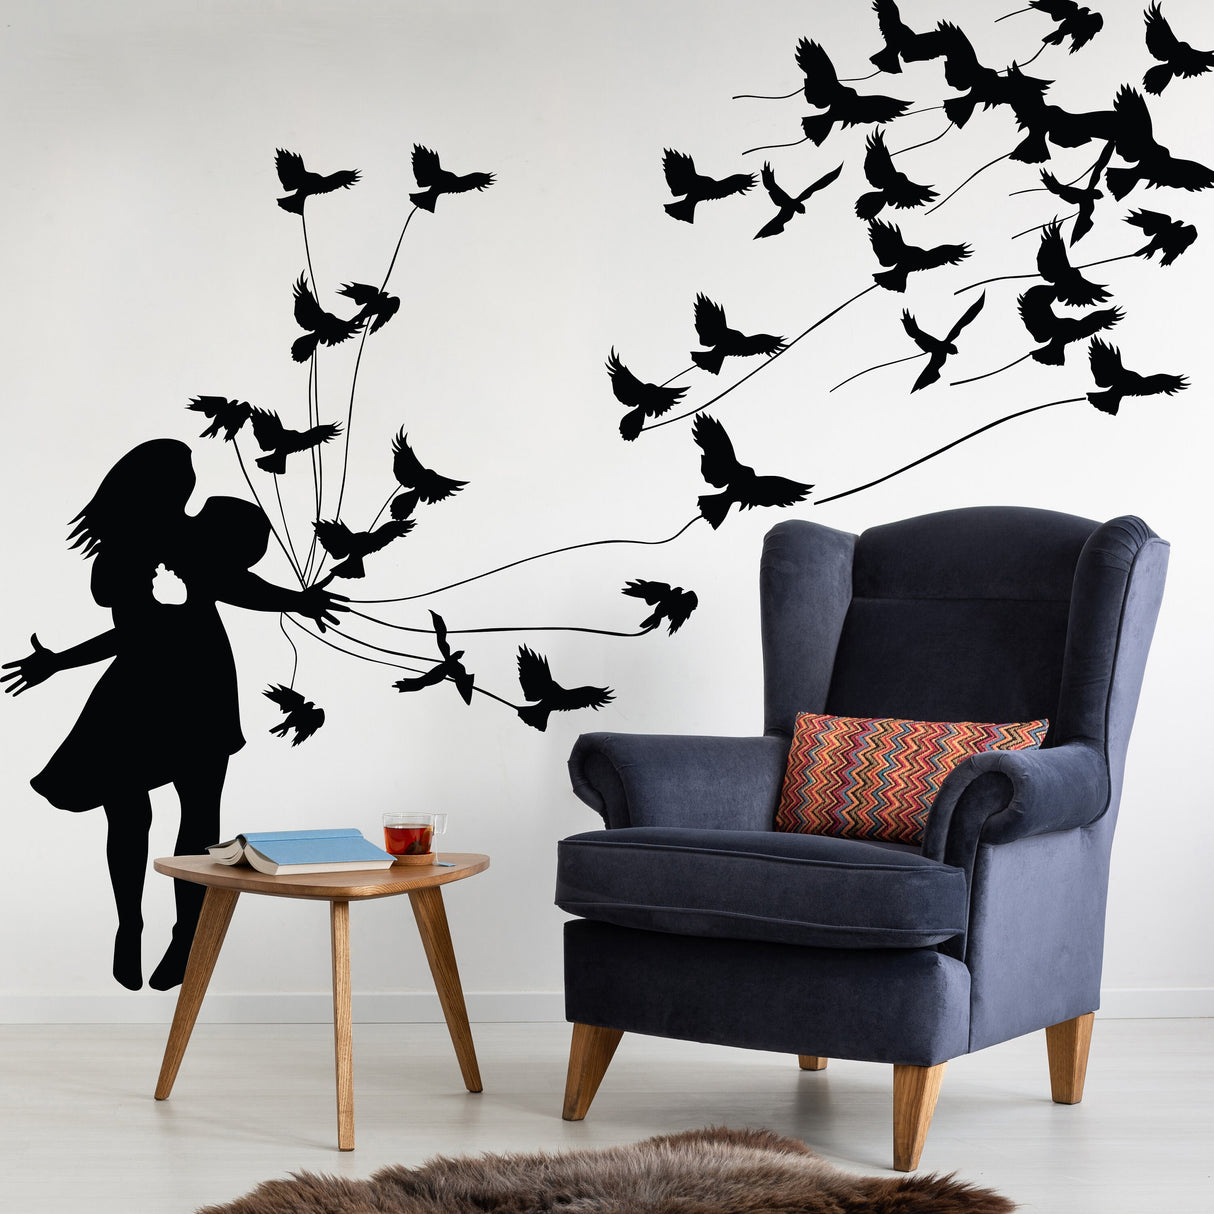 Kissing Wall Decal - Birds and Love Couple Wall Sticker